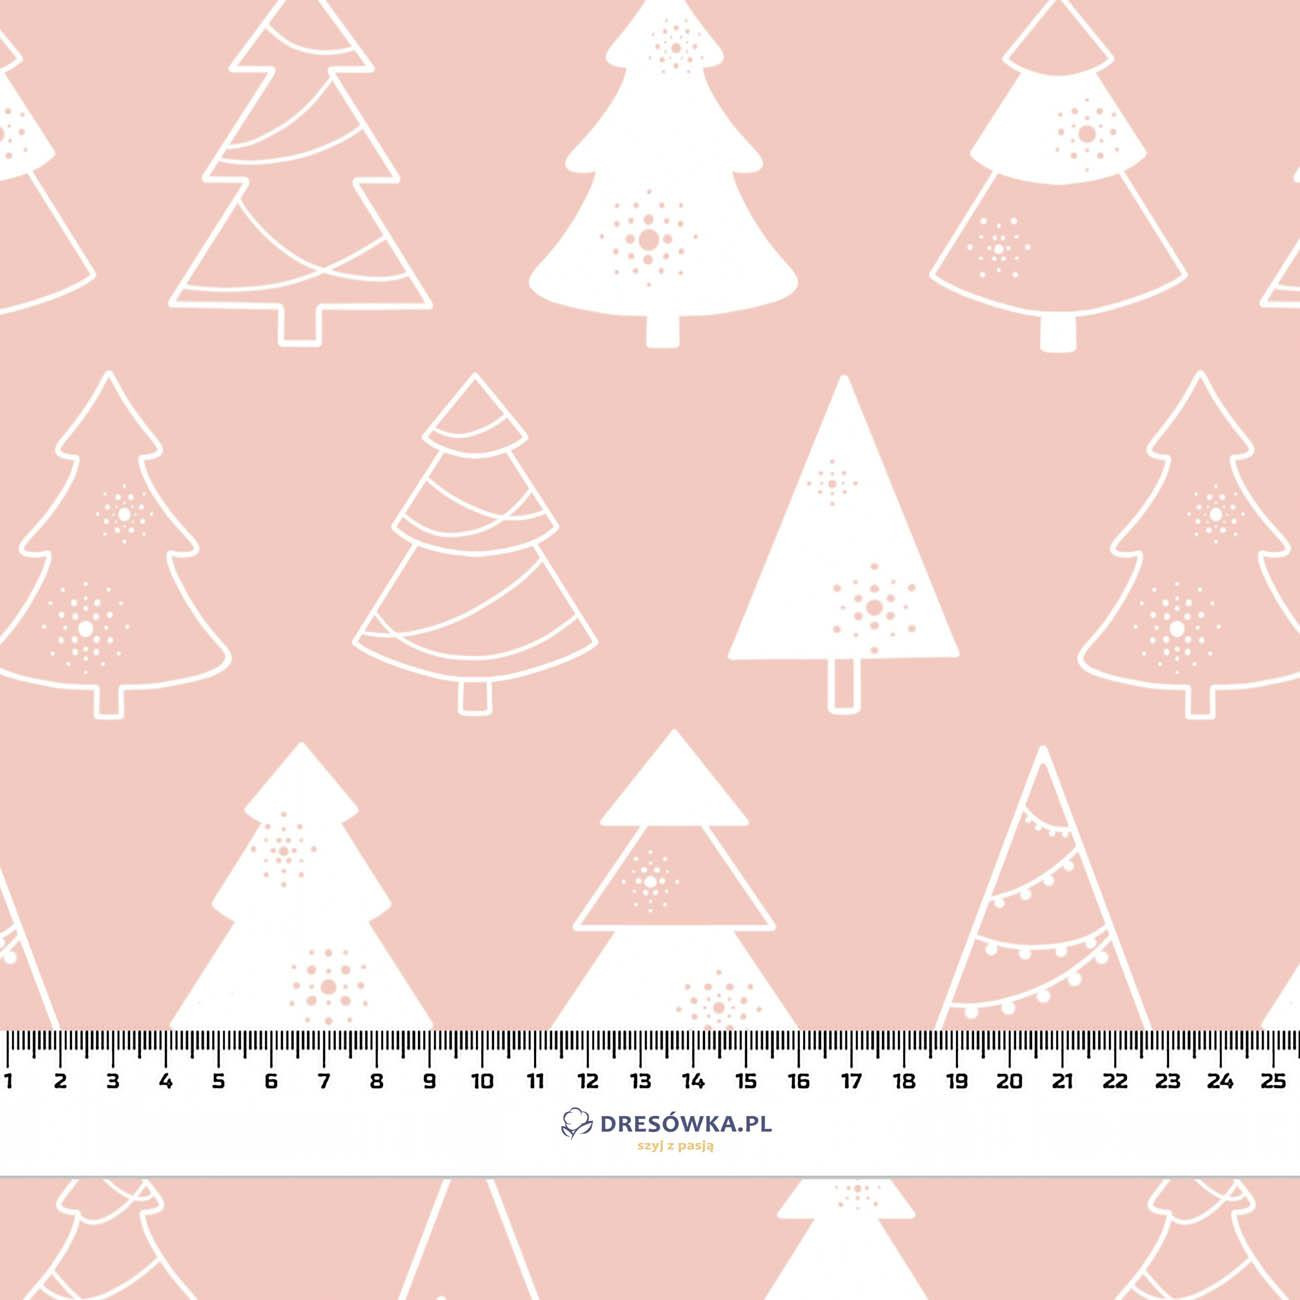 GLAZED CHRISTMAS TREES (CHRISTMAS GINGERBREAD) / dusky pink - brushed knit fabric with teddy / alpine fleece